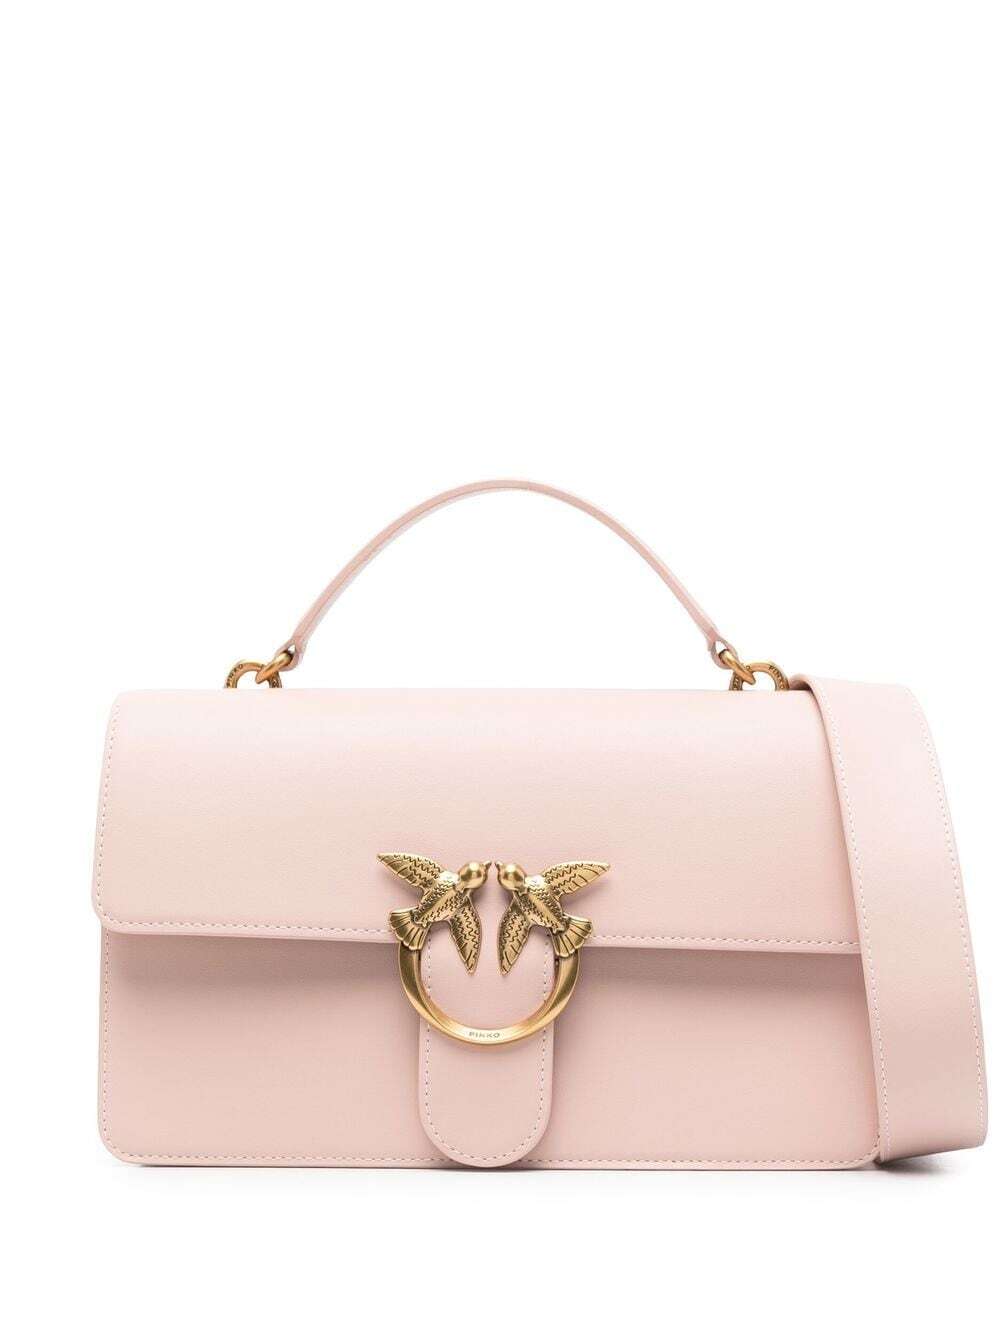 PINKO Love One Classic leather crossbody bag in pink